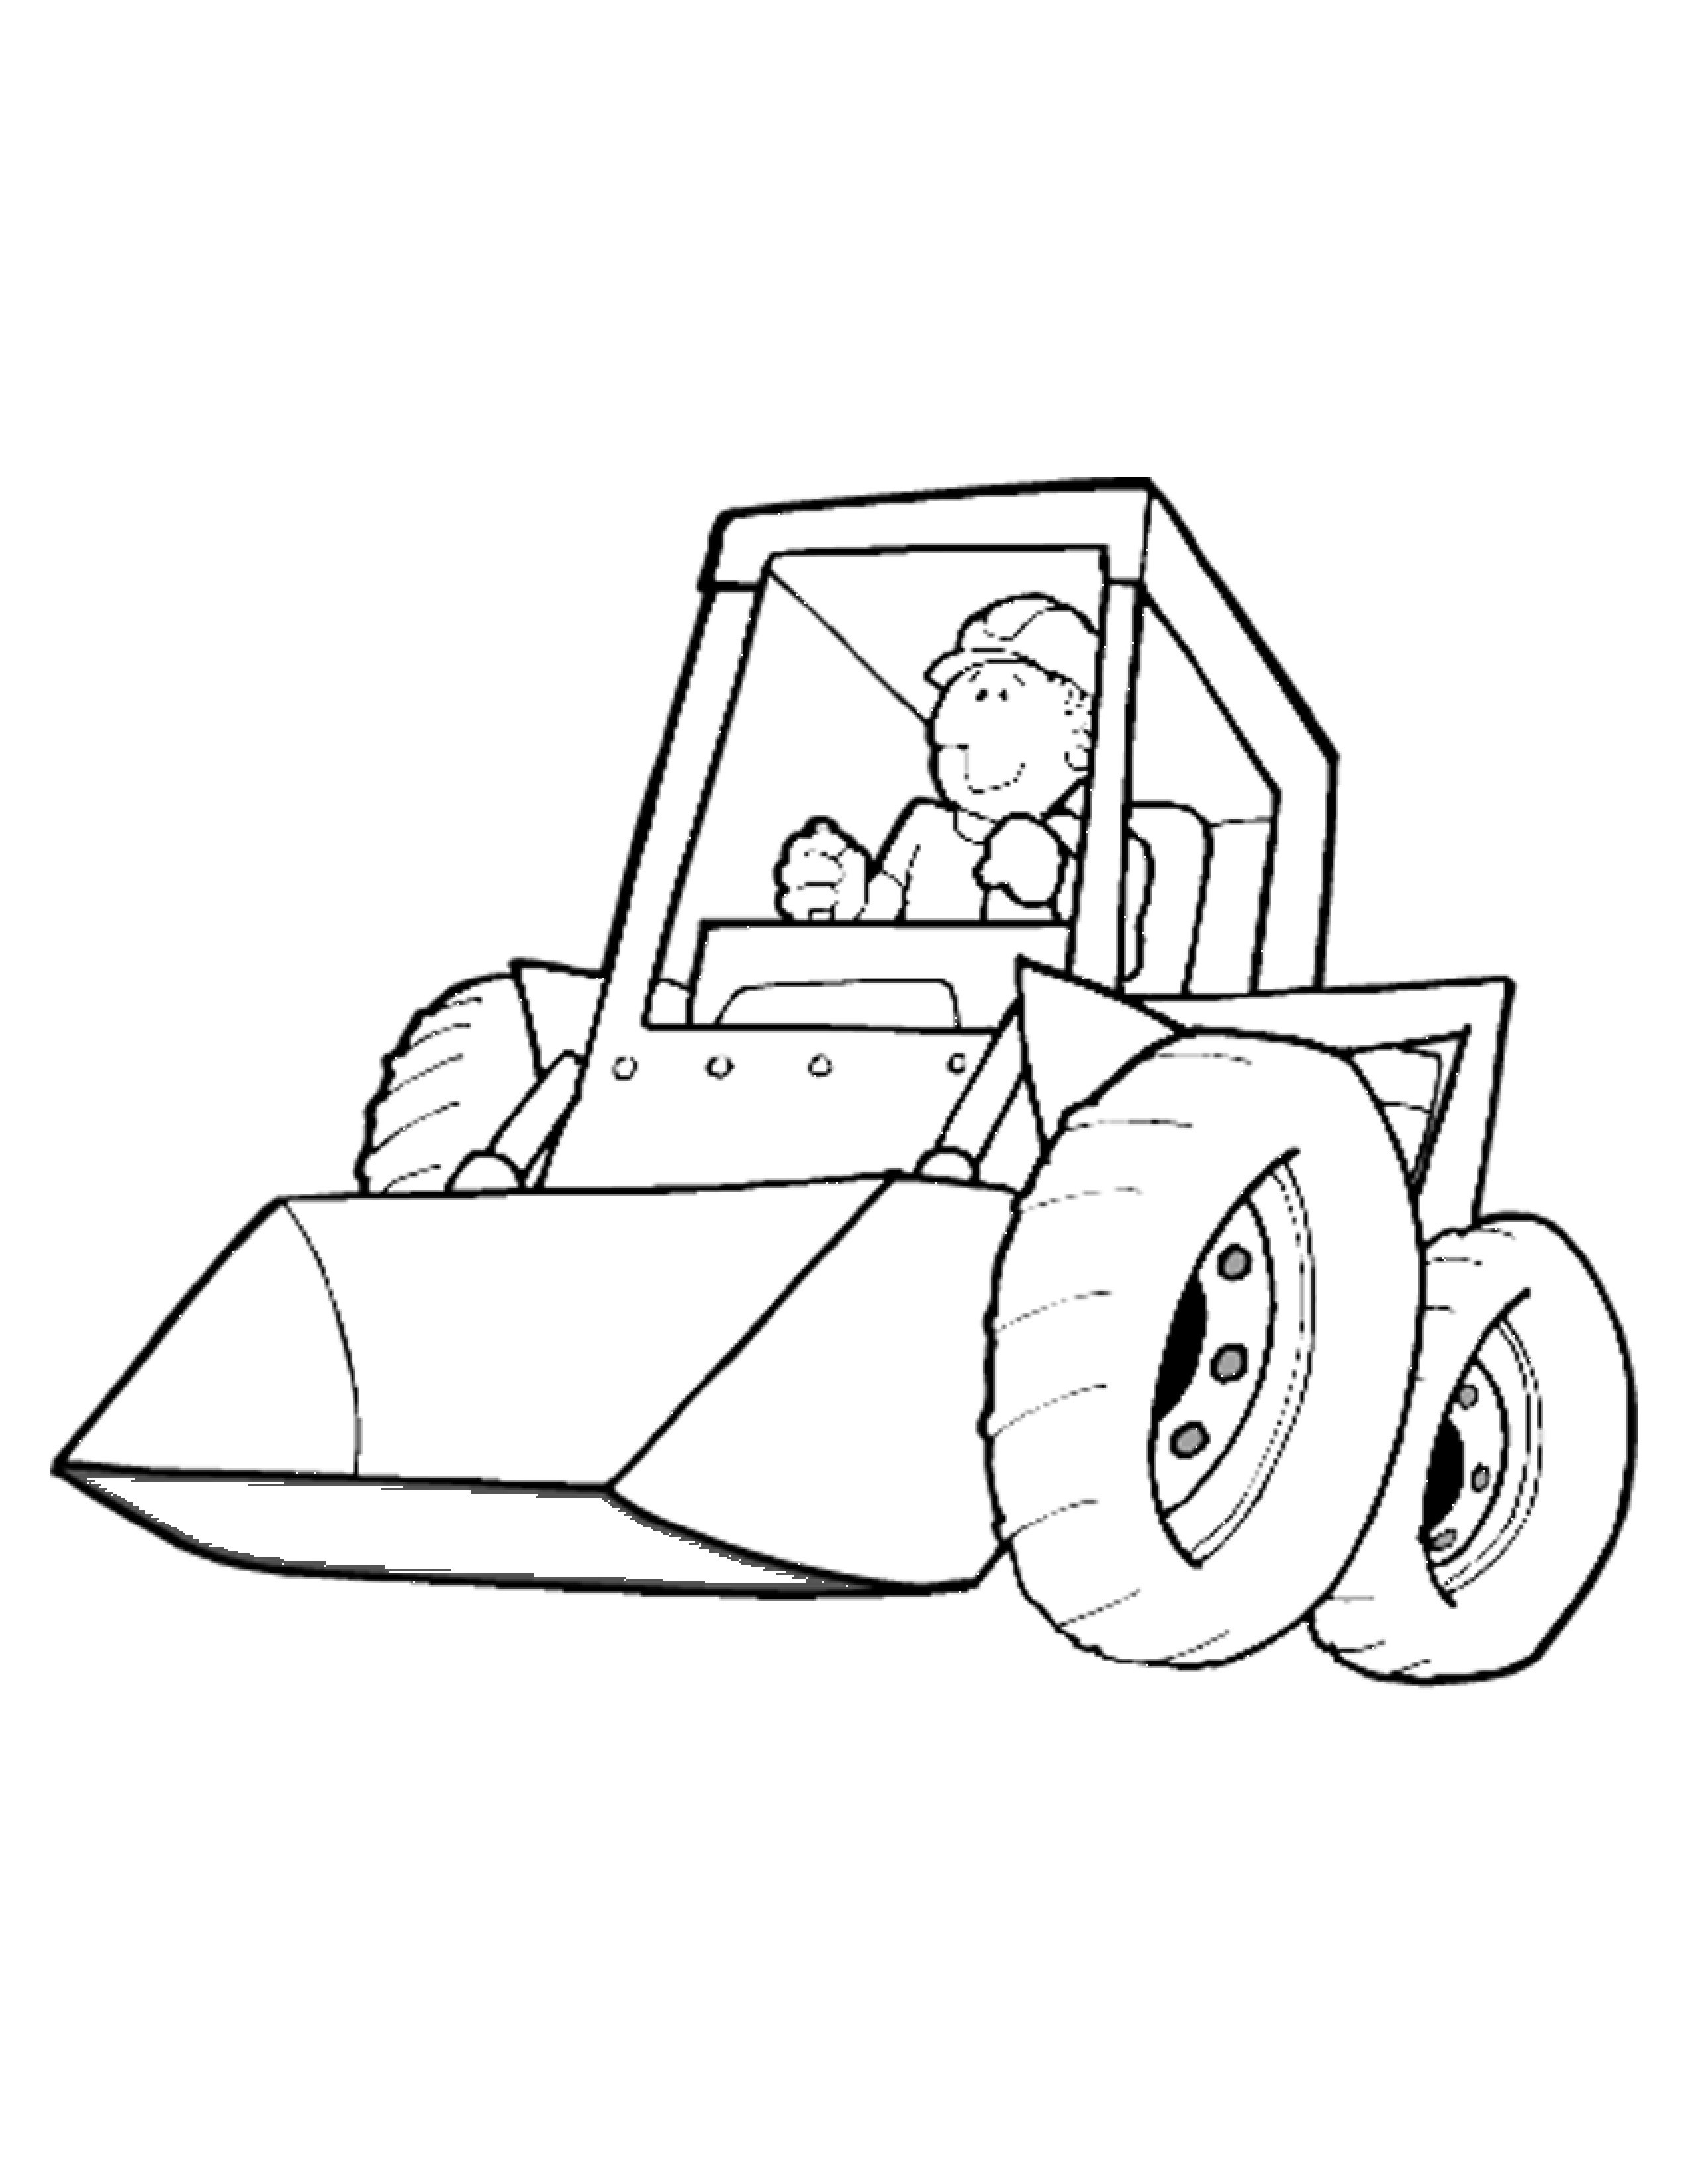 Free Coloring Sheets Construction Trucks
 Construction Equipment Coloring Pages